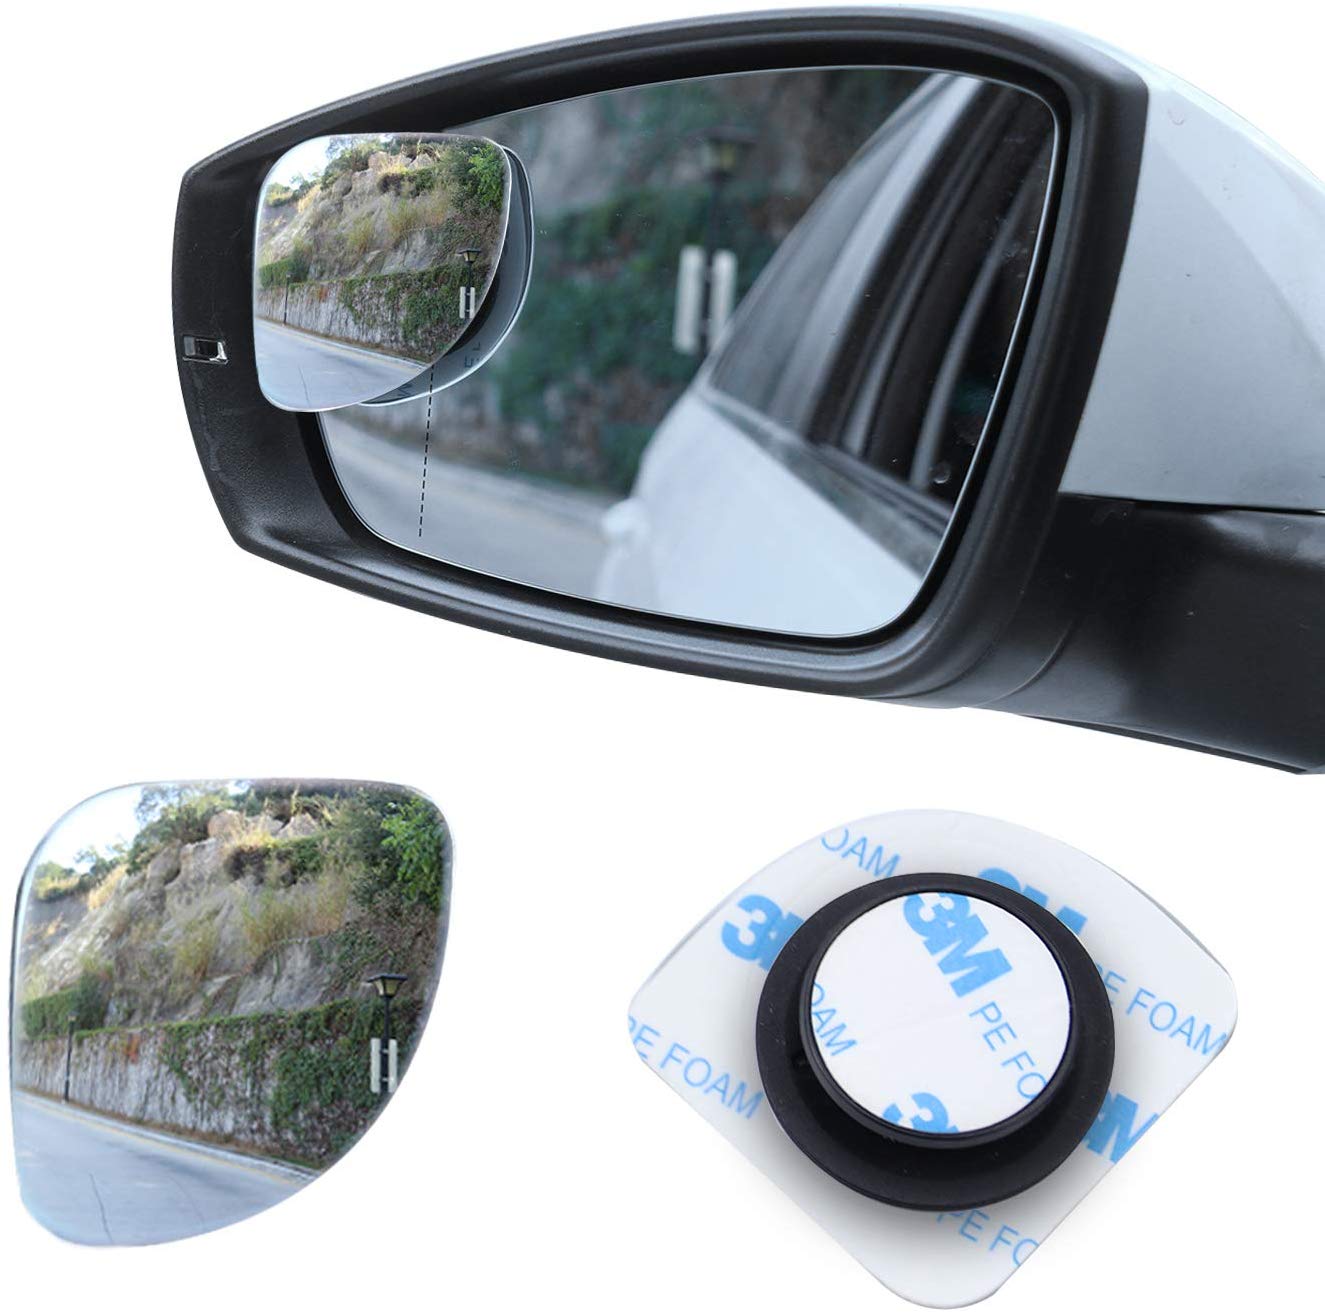 LivTee Blind Spot Mirror，Fan Shaped 2.5‘’ HD Glass Frameless Convex Rear View Mirror with wide angle Adjustable Stick for Cars SUV and Trucks, Pack of 2